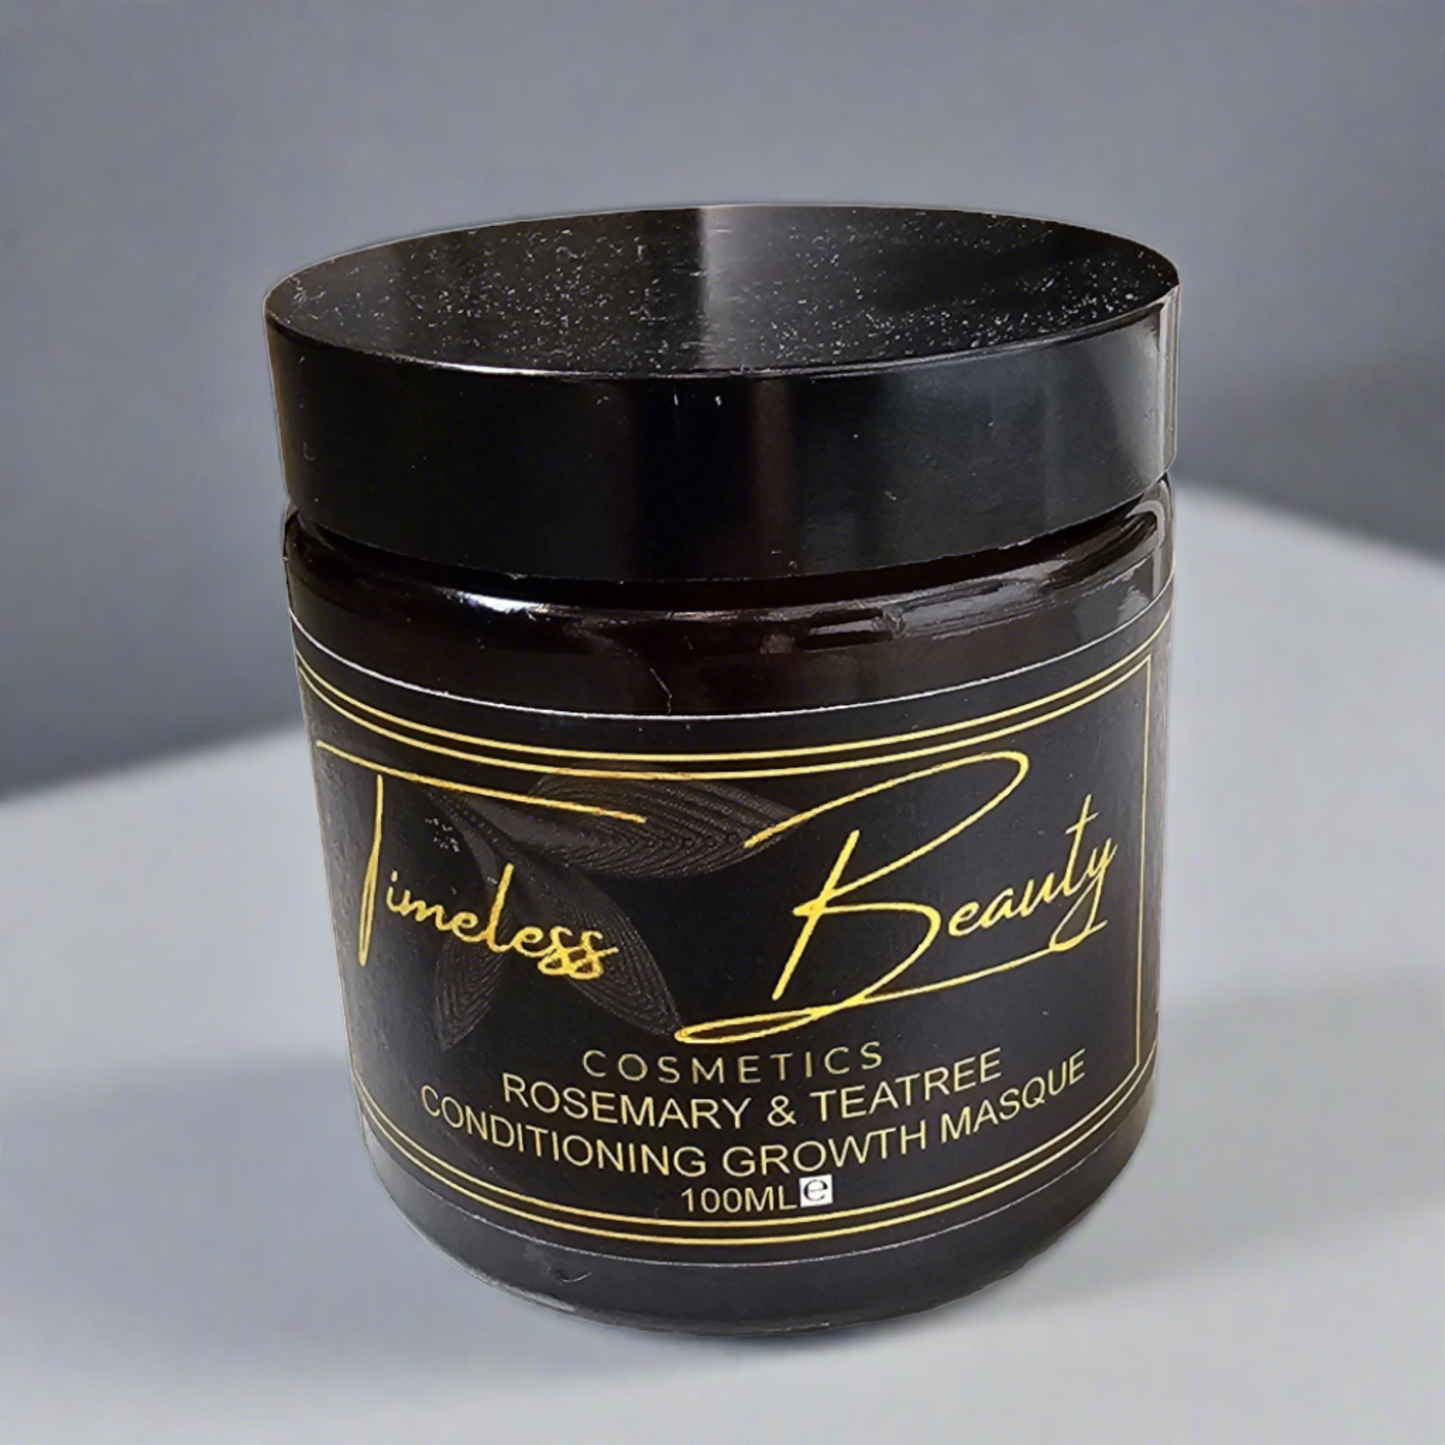 Rosemary & Teatree Hair and Scalp conditioning Masque Organic